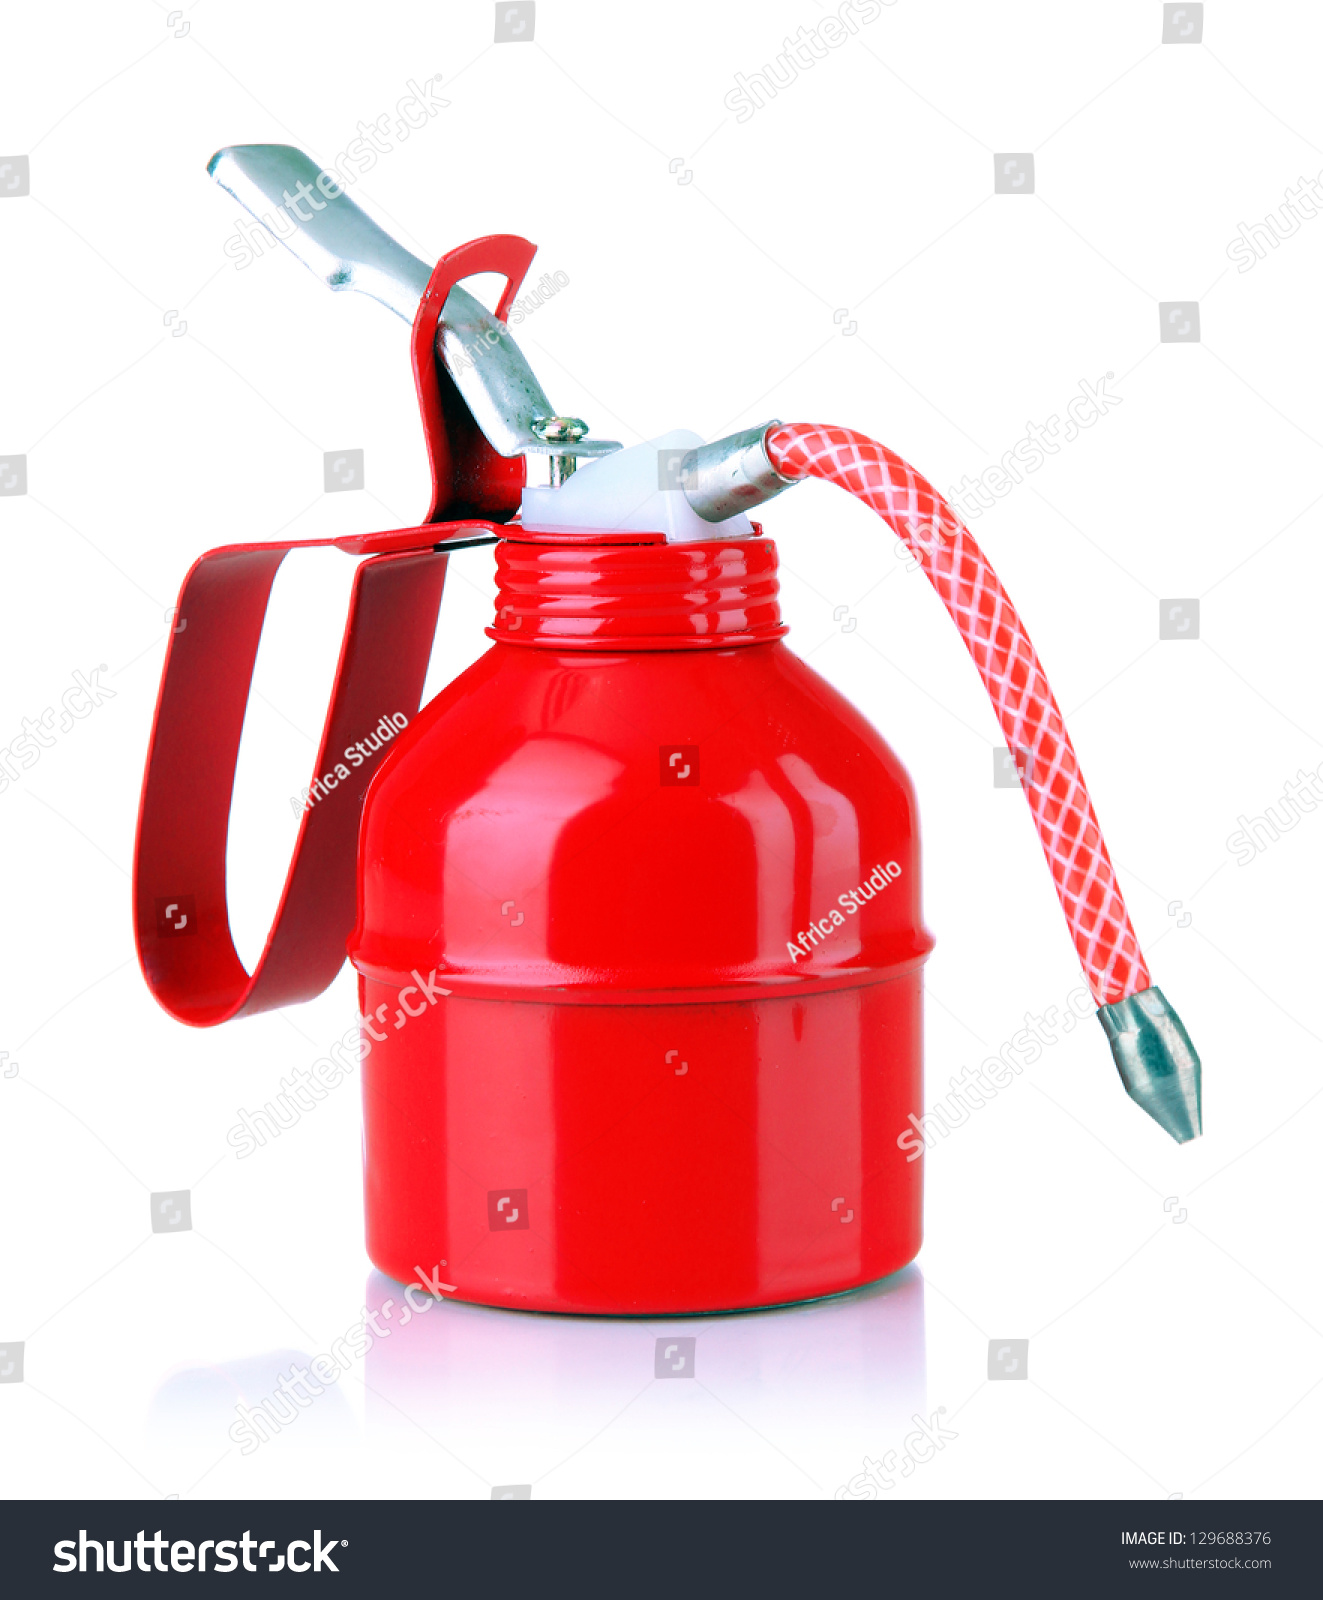 Oil Can Isolated On White Stock Photo 129688376 : Shutterstock